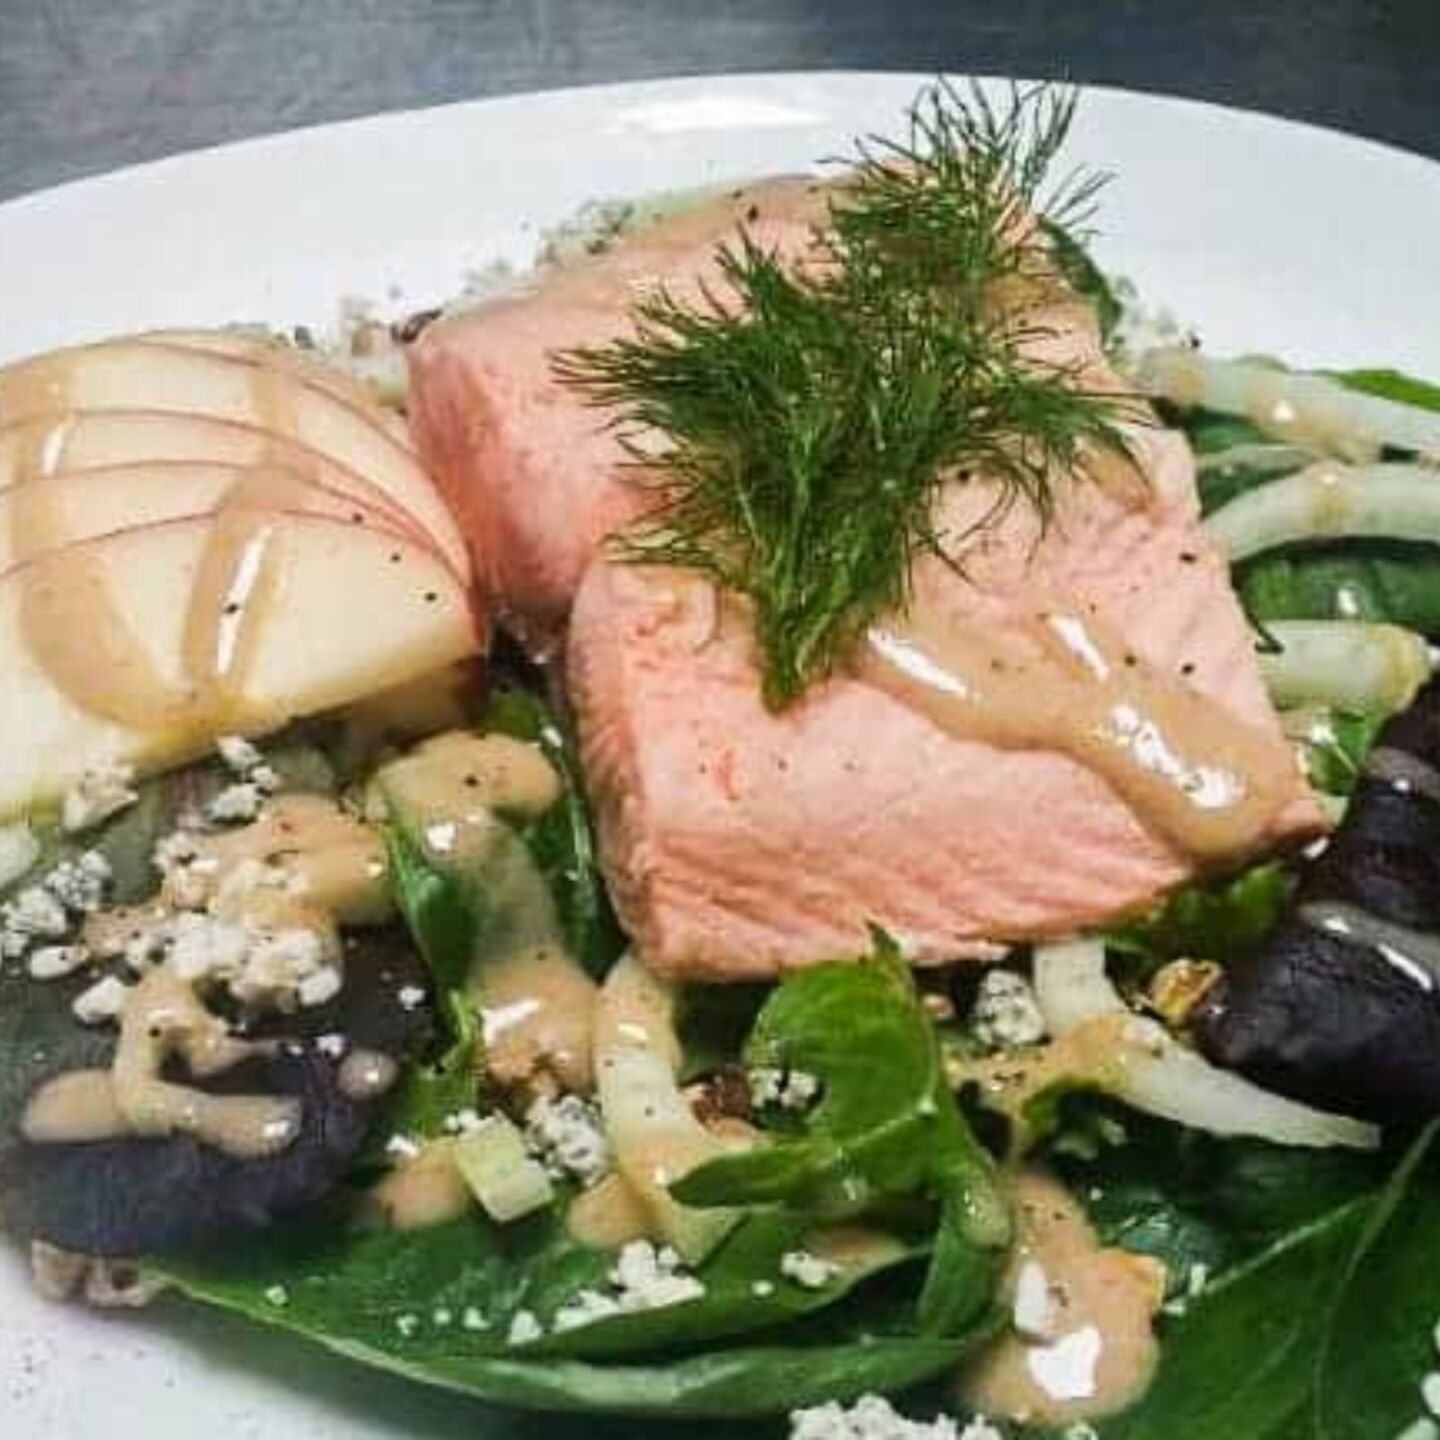 10. Poached salmon salad with apples, fennel, and blue cheese